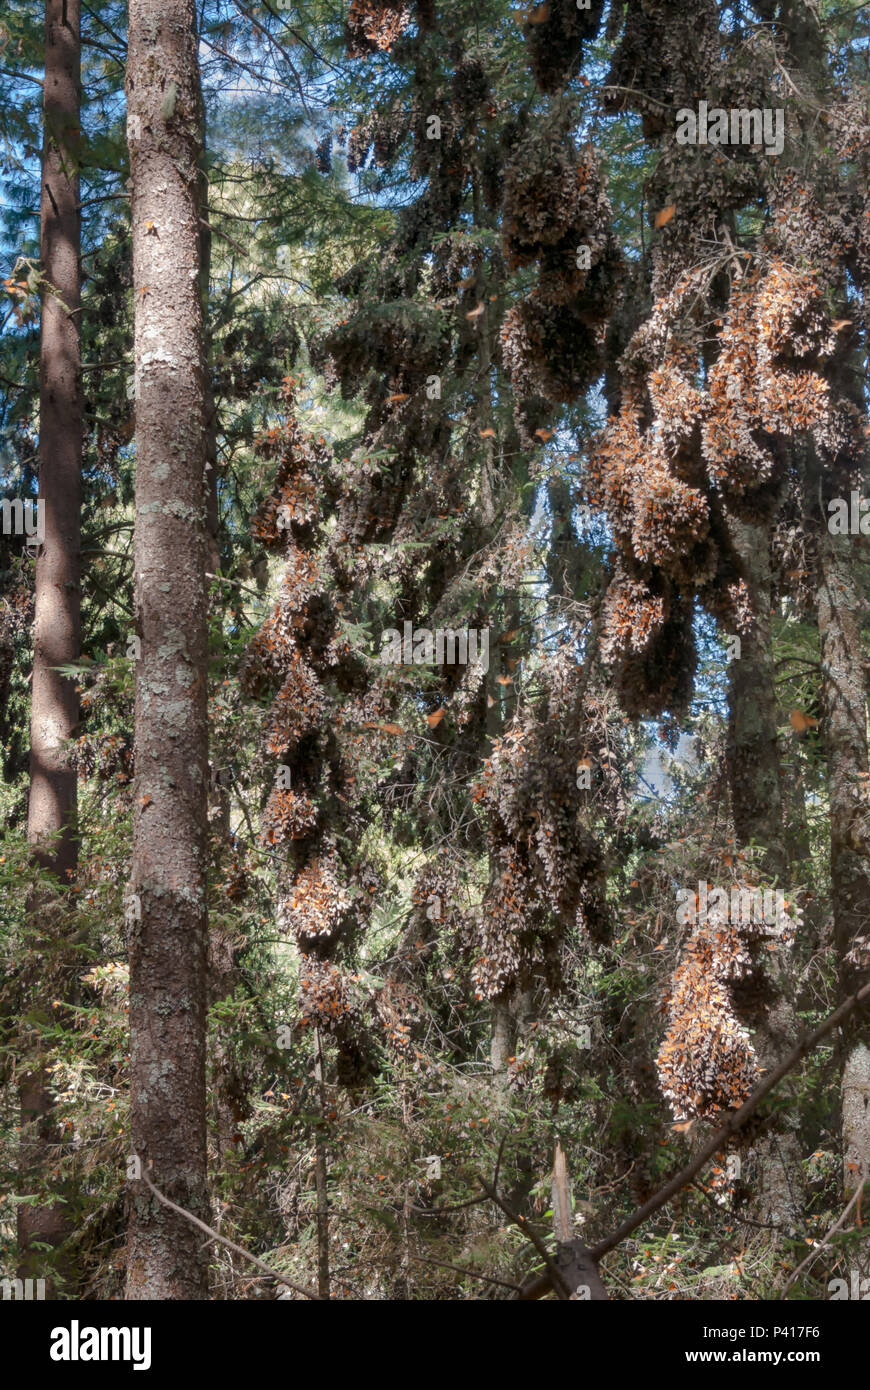 Monarch Butterflies clinging to branches in the forests of Mexico while over-wintering. Stock Photo